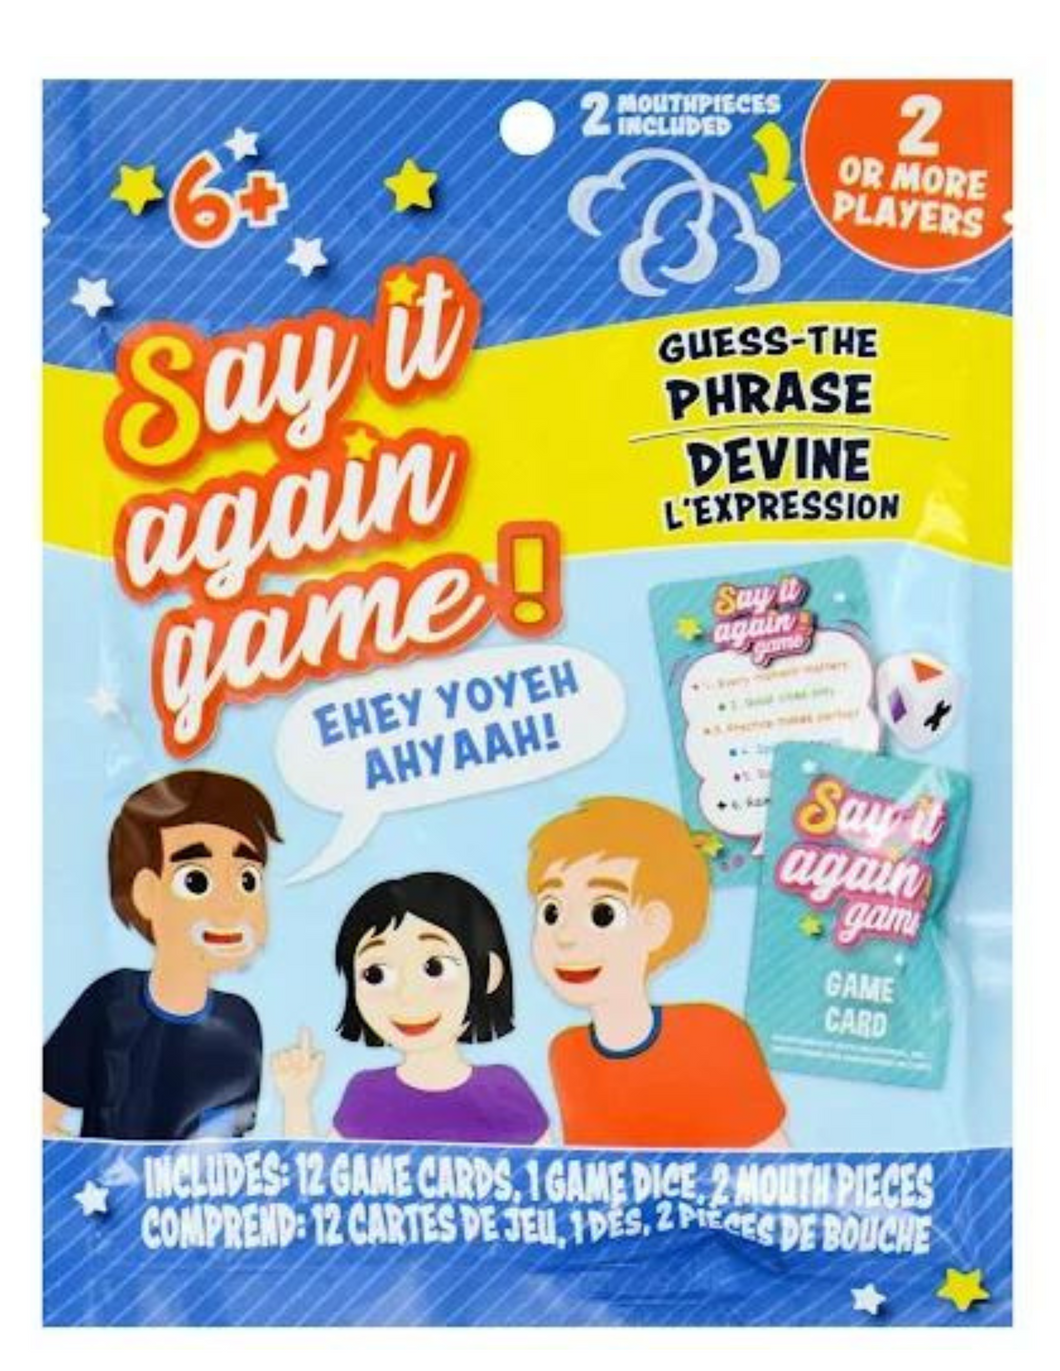 Say it Again Game! Guess-the-Phrase Mouthguard Game